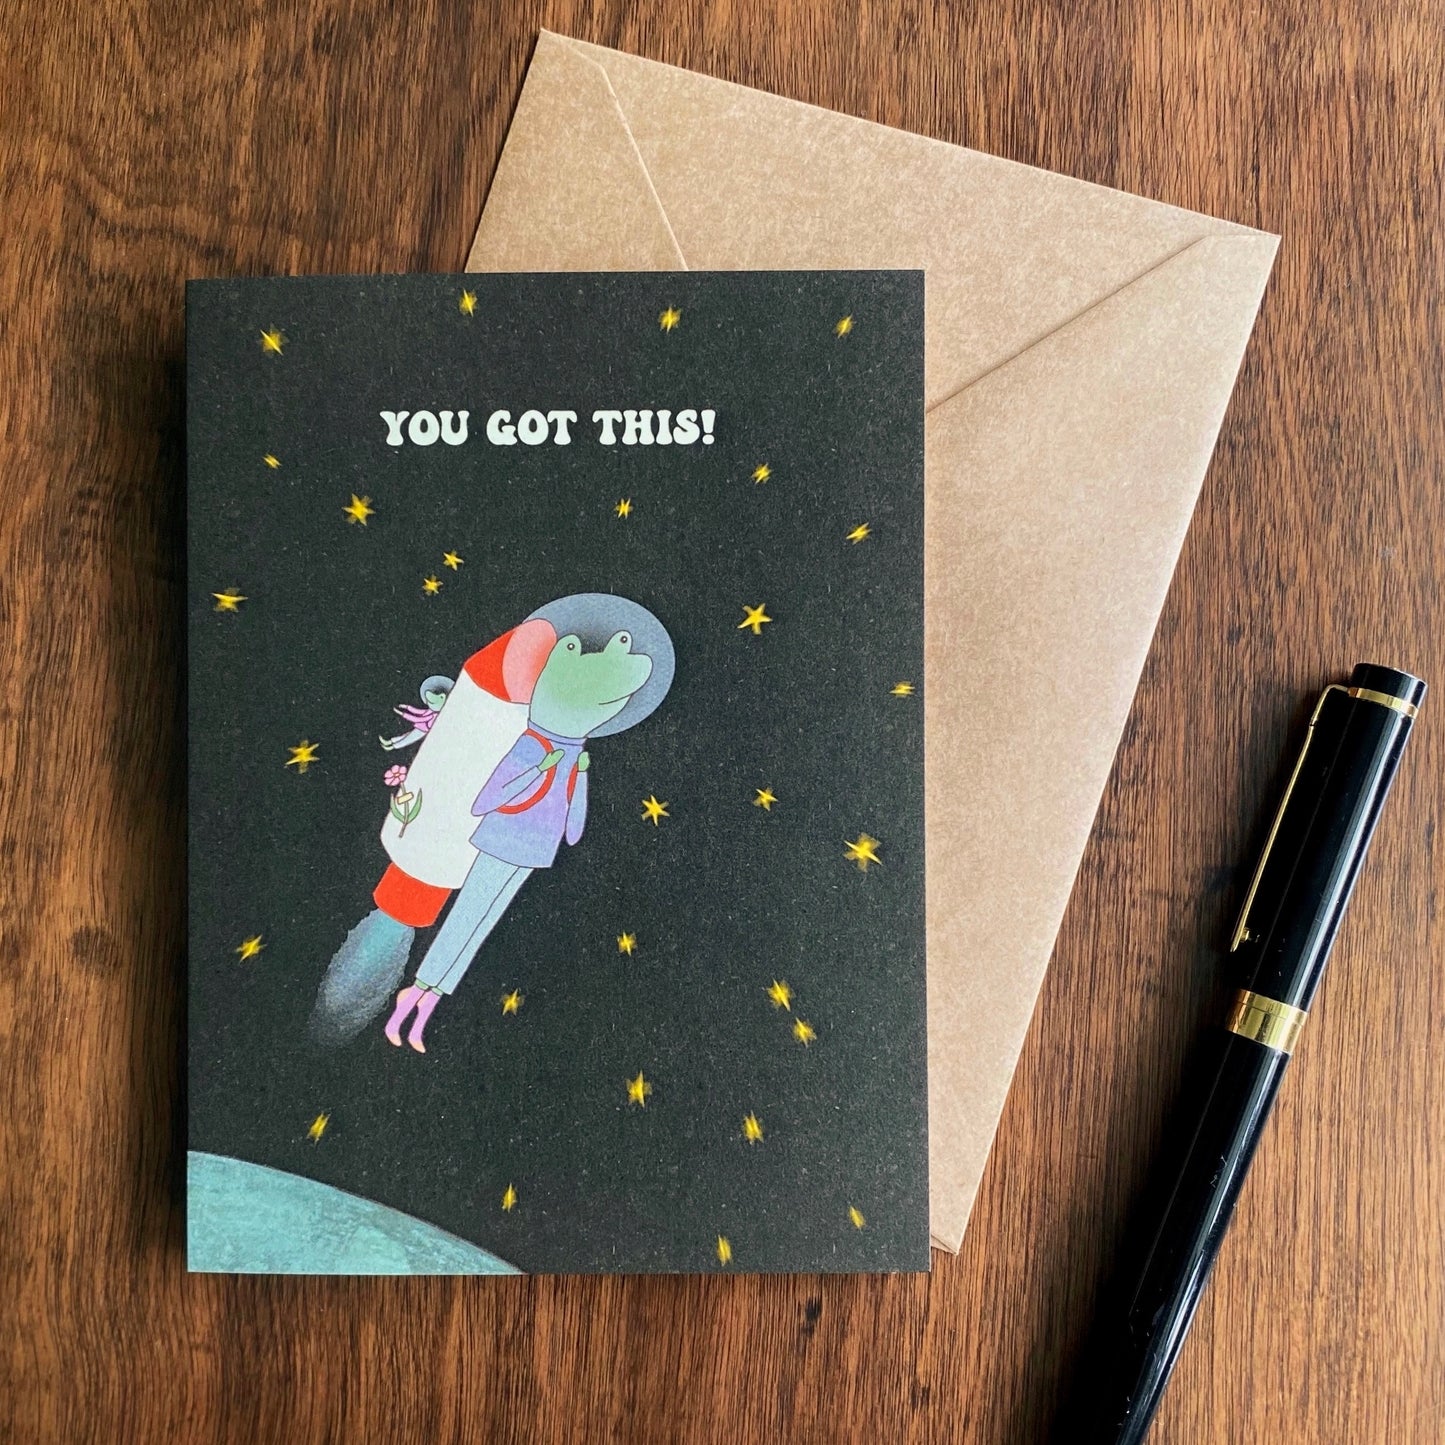 Cute Good luck Card with the illustration of a frog as an astronaut heading to the universe with a rocket machine on his back